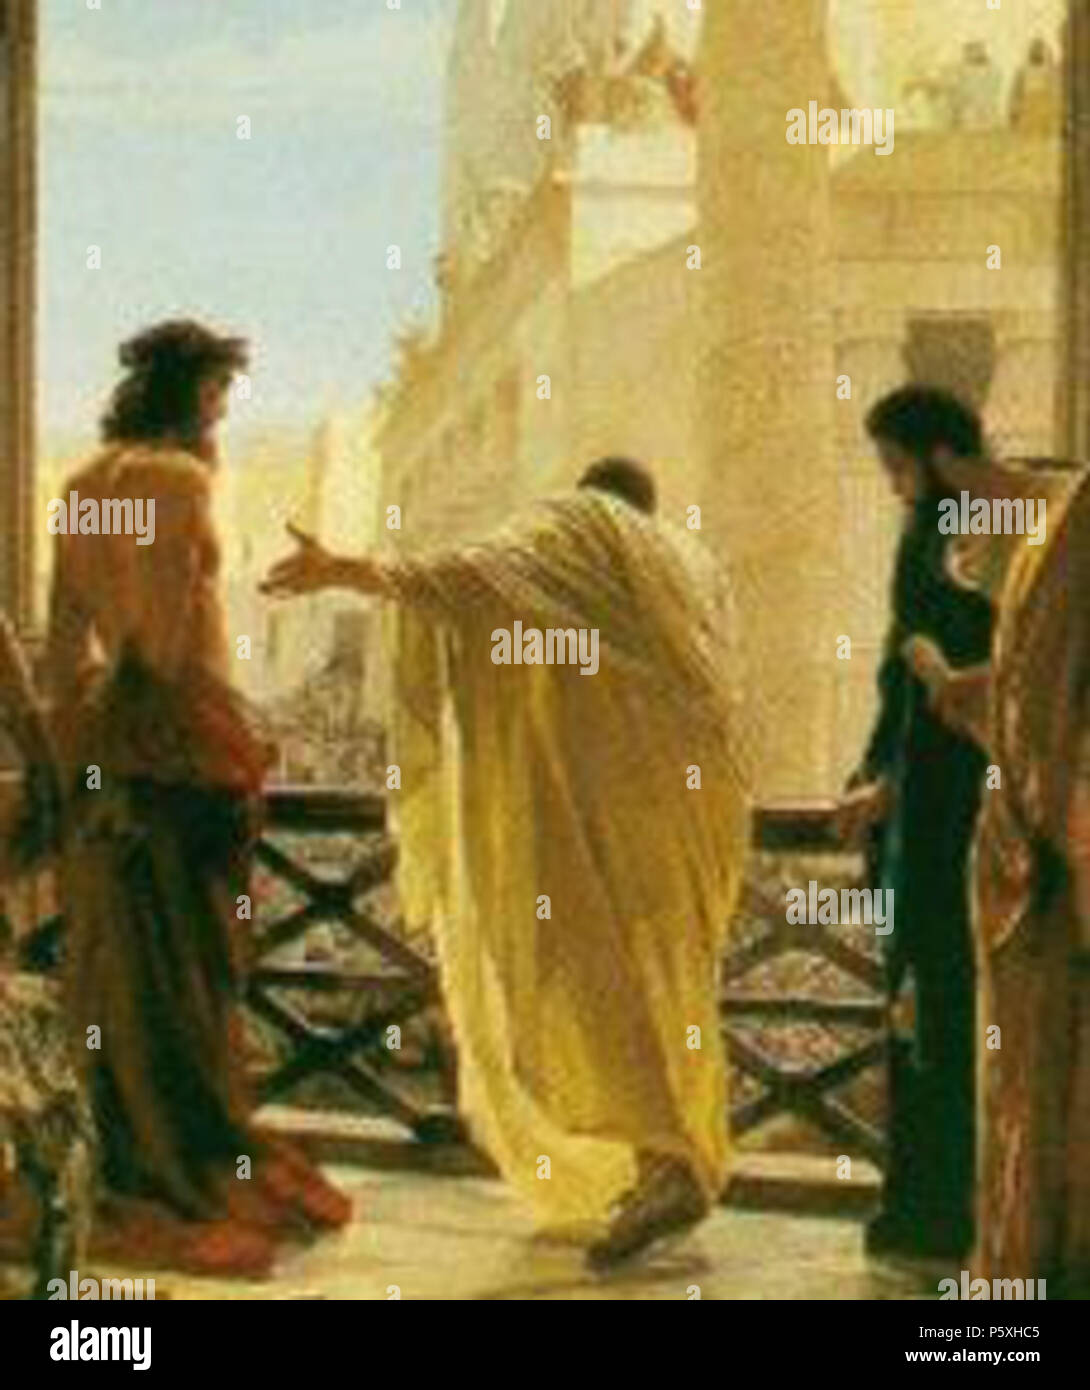 N/A. English: A cropped version of Antonio Ciseri's depiction of Pontius Pilate presenting a scourged Christ to the people. See: Eccehomo1.jpg for full version. before 1891. The original uploader was Scifiintel at English .. Later version(s) were uploaded by Edison at en..   Antonio Ciseri  (1821–1891)     Description Swiss-Italian painter and university teacher  Date of birth/death 25 October 1821 8 March 1891  Location of birth/death Ronco sopra Ascona Florence  Work location Florence  Authority control  : Q601609 VIAF:55030004 ISNI:0000 0000 6630 0306 ULAN:500030859 LCCN:n93023875 WGA:CISER Stock Photo